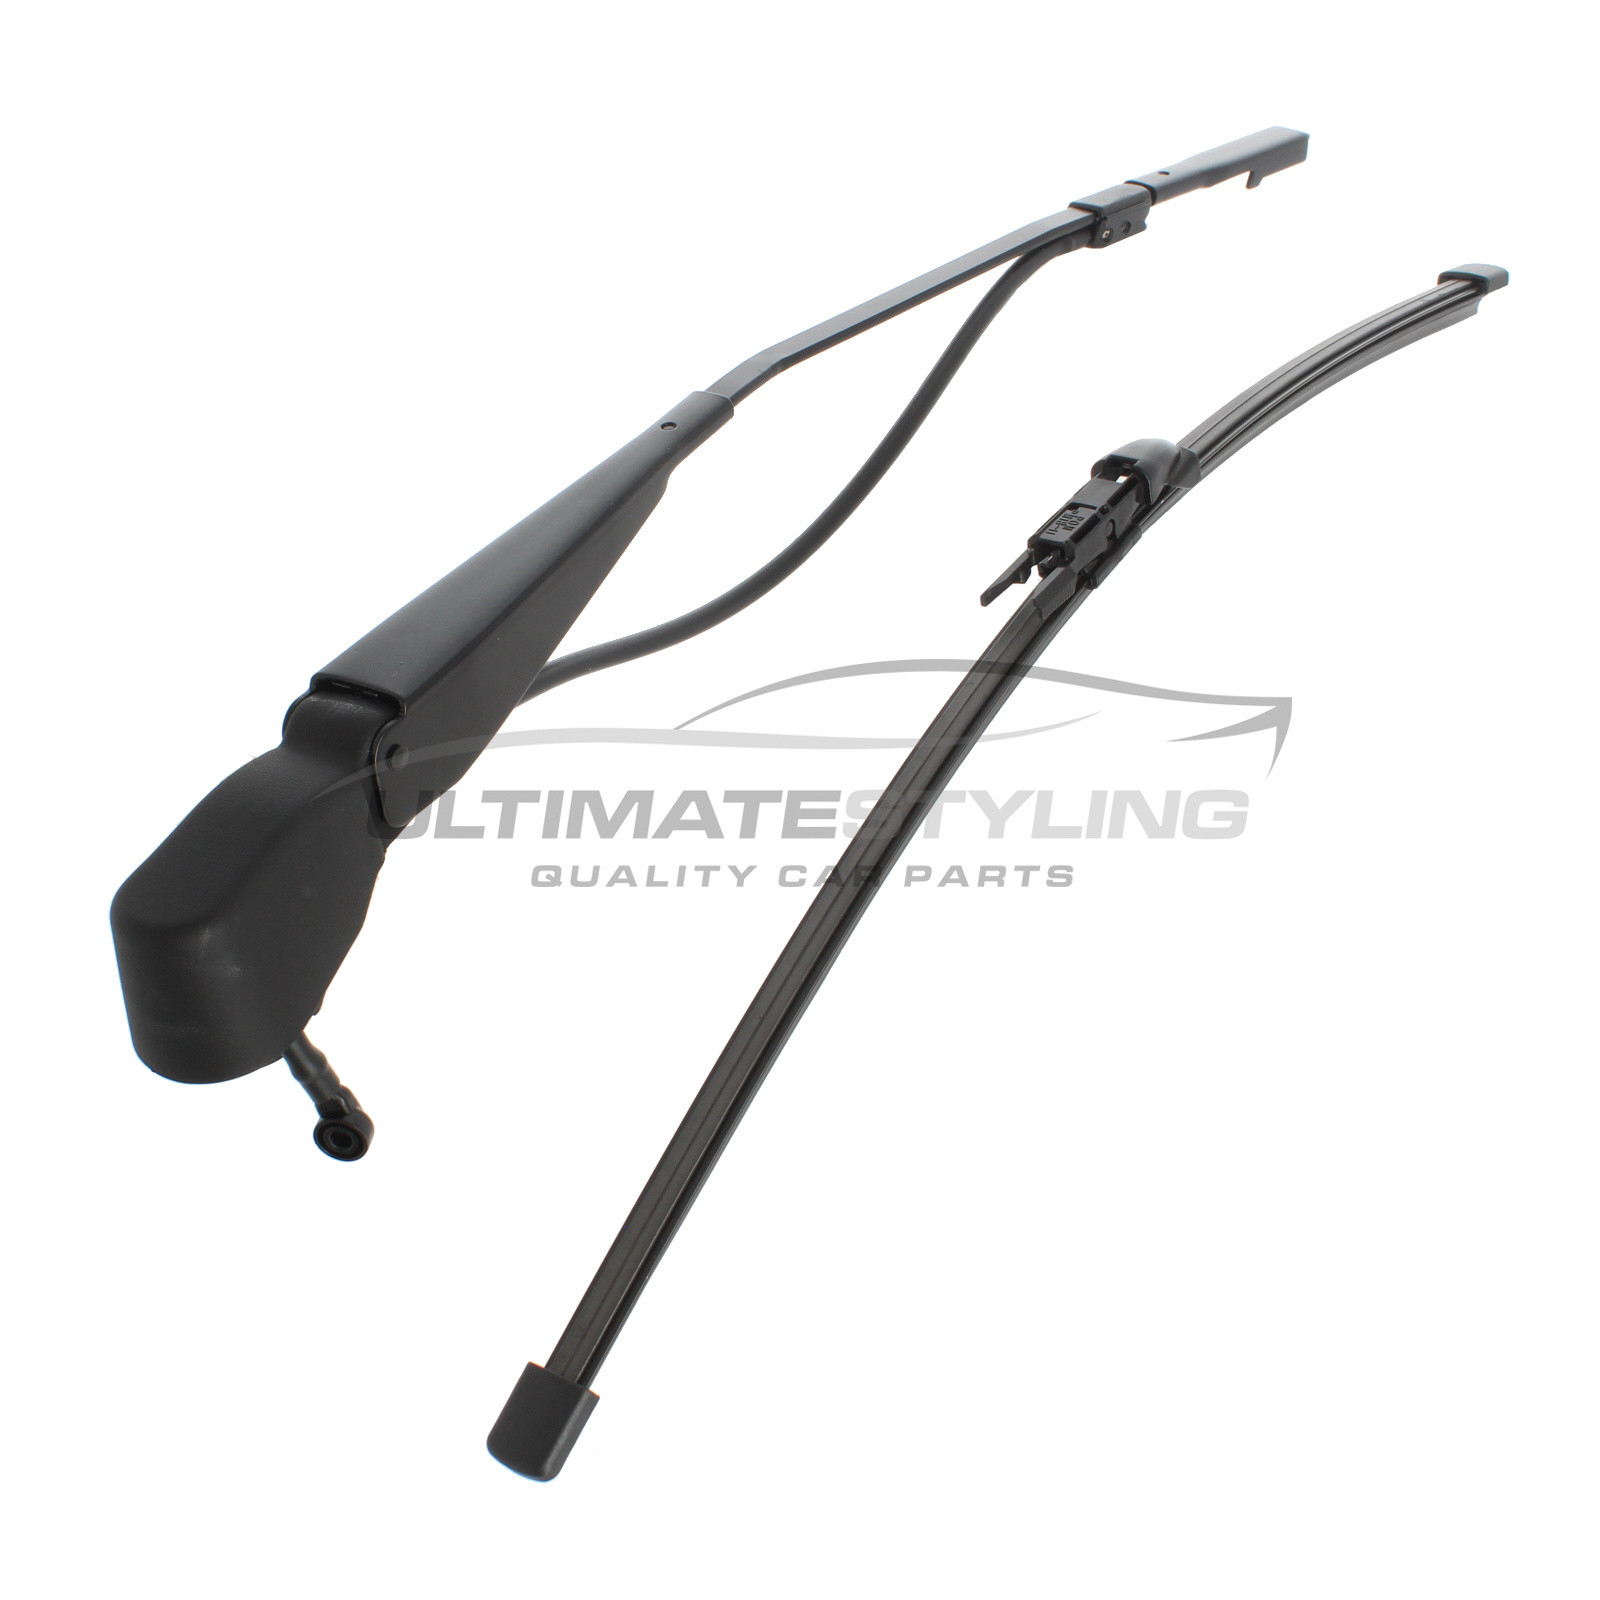 Drivers Side (RH) Rear Wiper Arm & Blade Set for VW Crafter